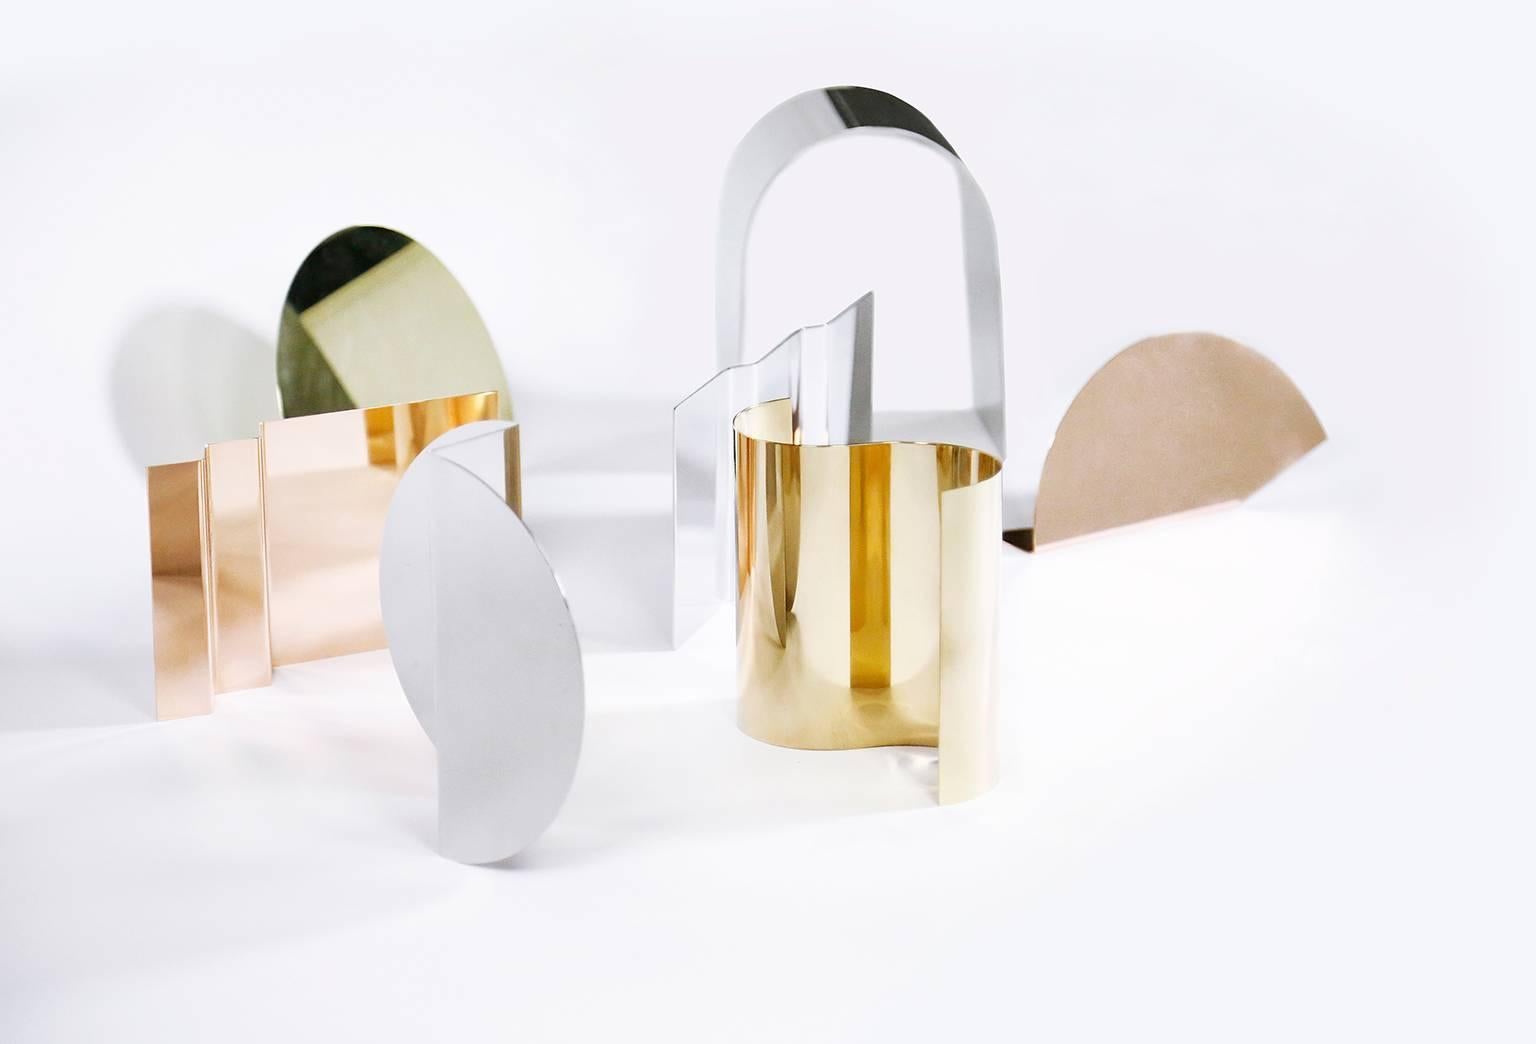 American 'Bent Mirrors' Minimalist Objects in Bronze, Brass, Copper, Stainless Steel For Sale